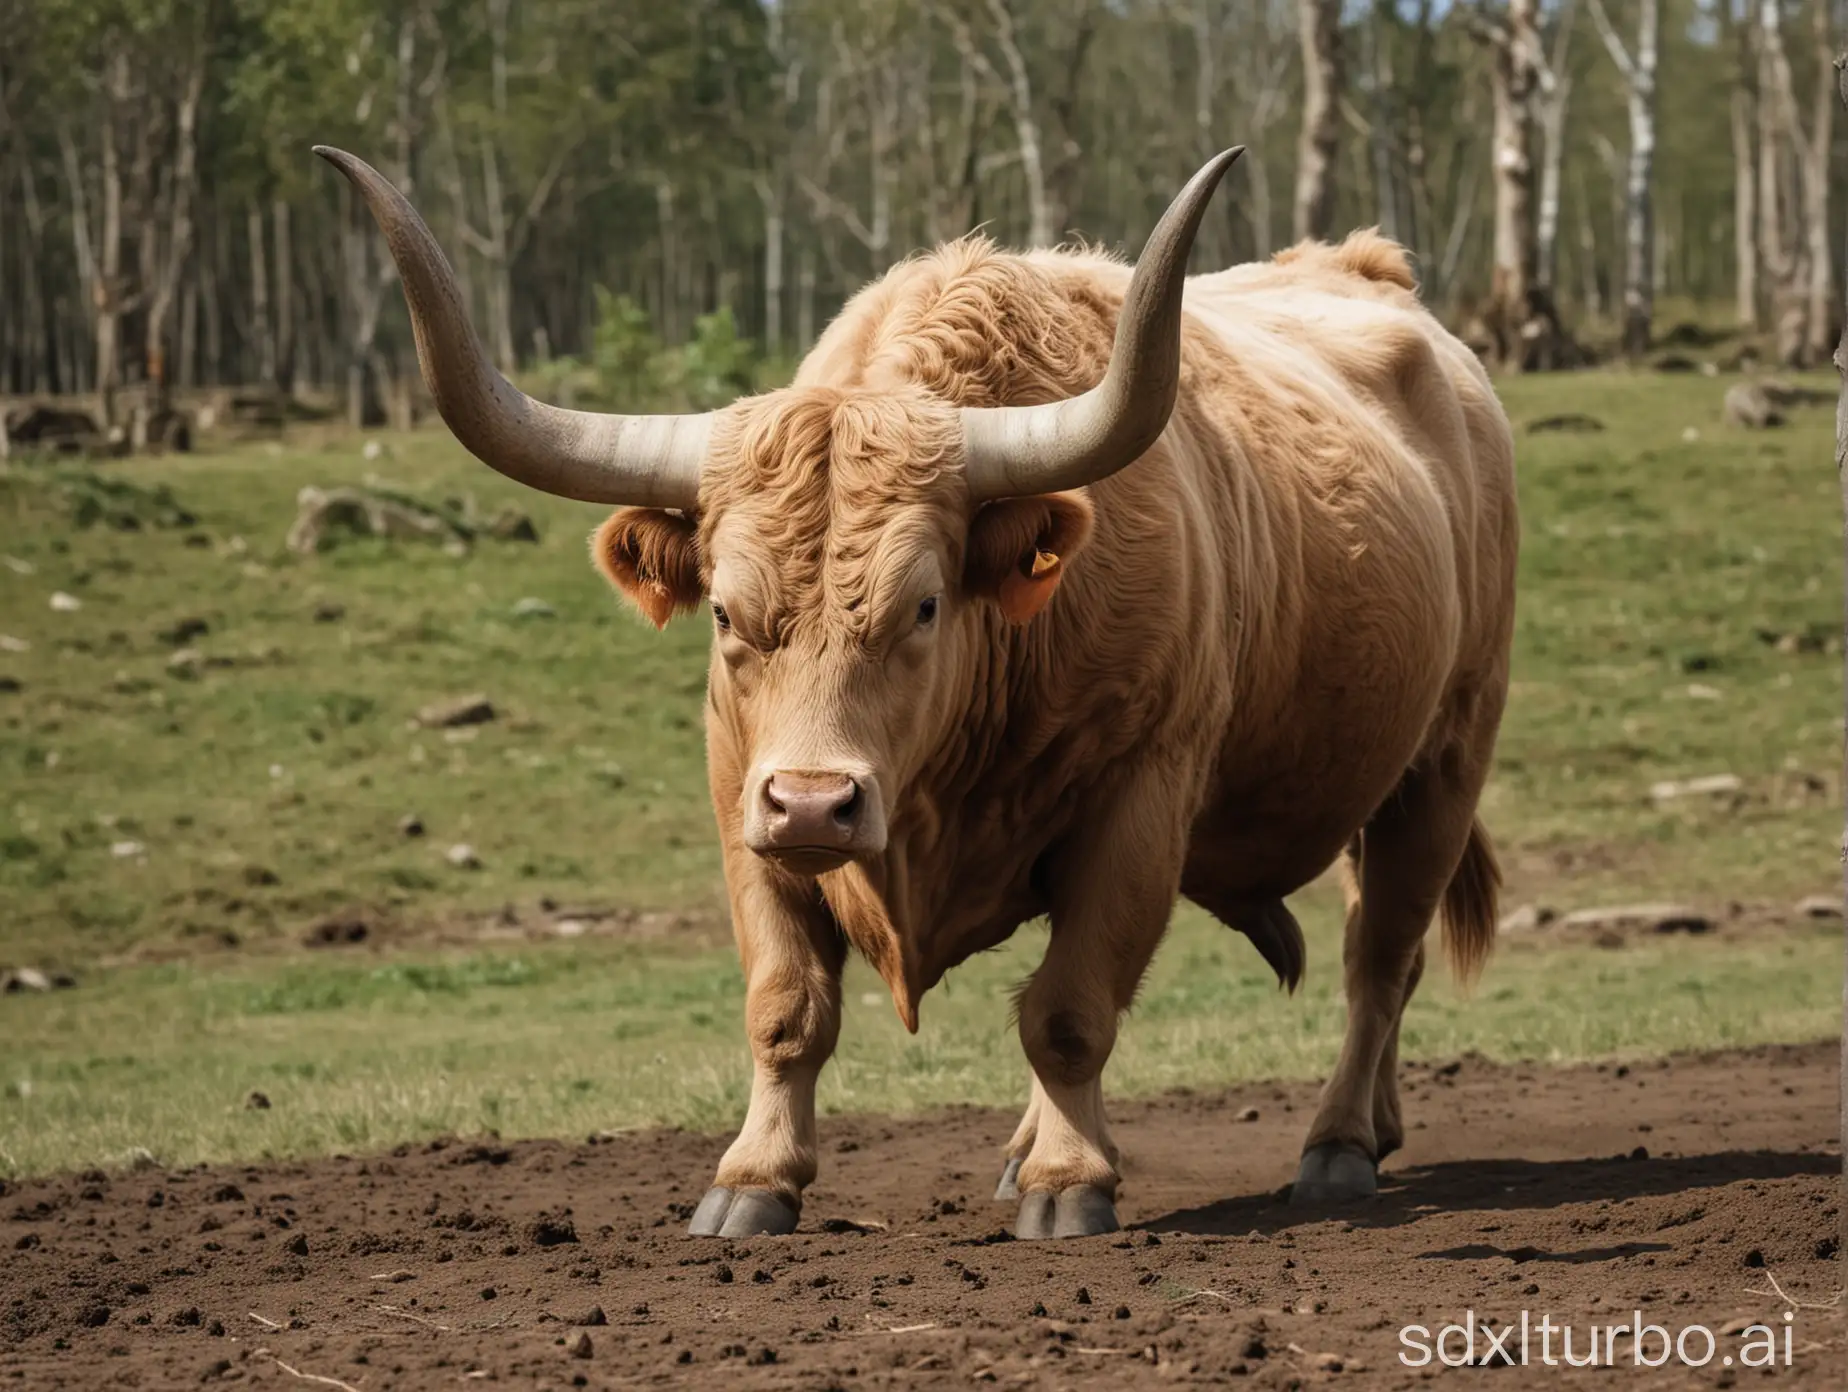 Bull with horns curved towards the ground